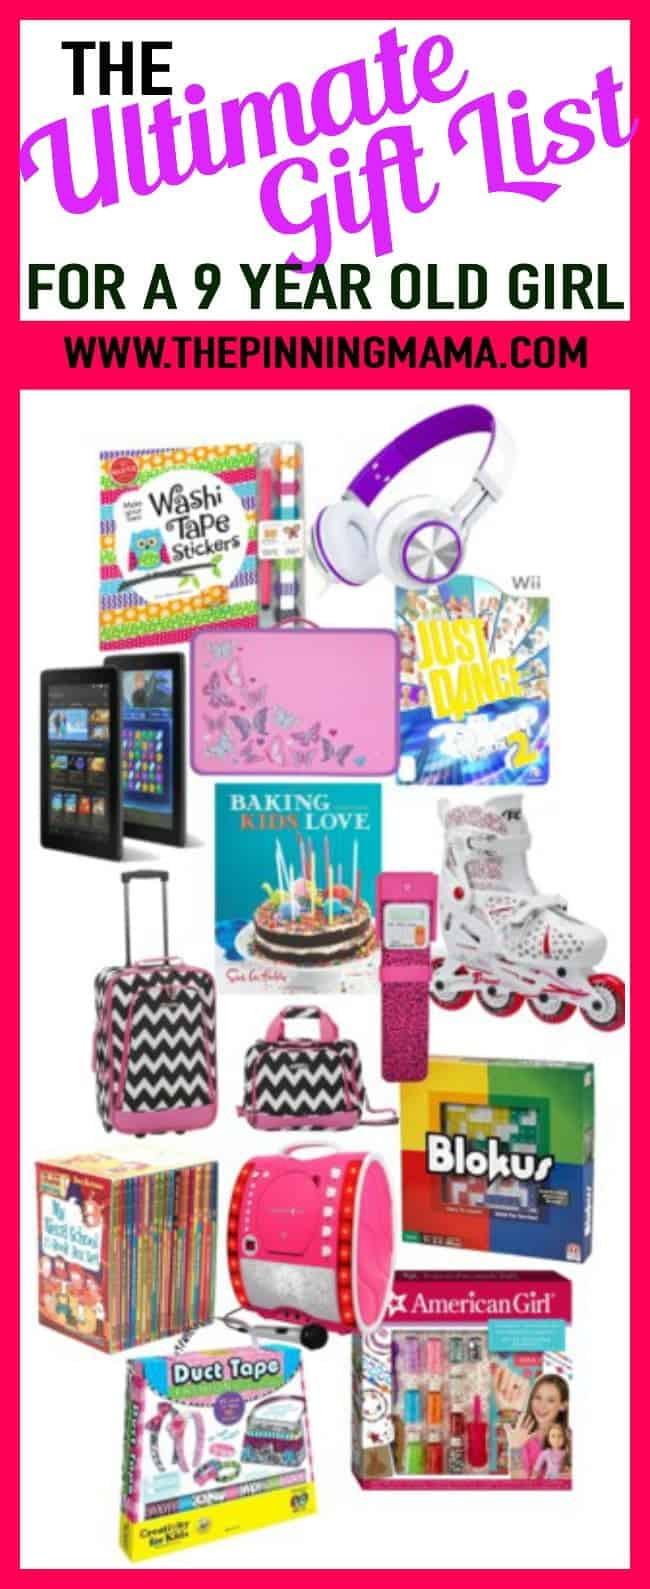 9 Year Girl Birthday Gift Ideas
 The Ultimate Gift List for a 9 Year Old Girl • The Pinning